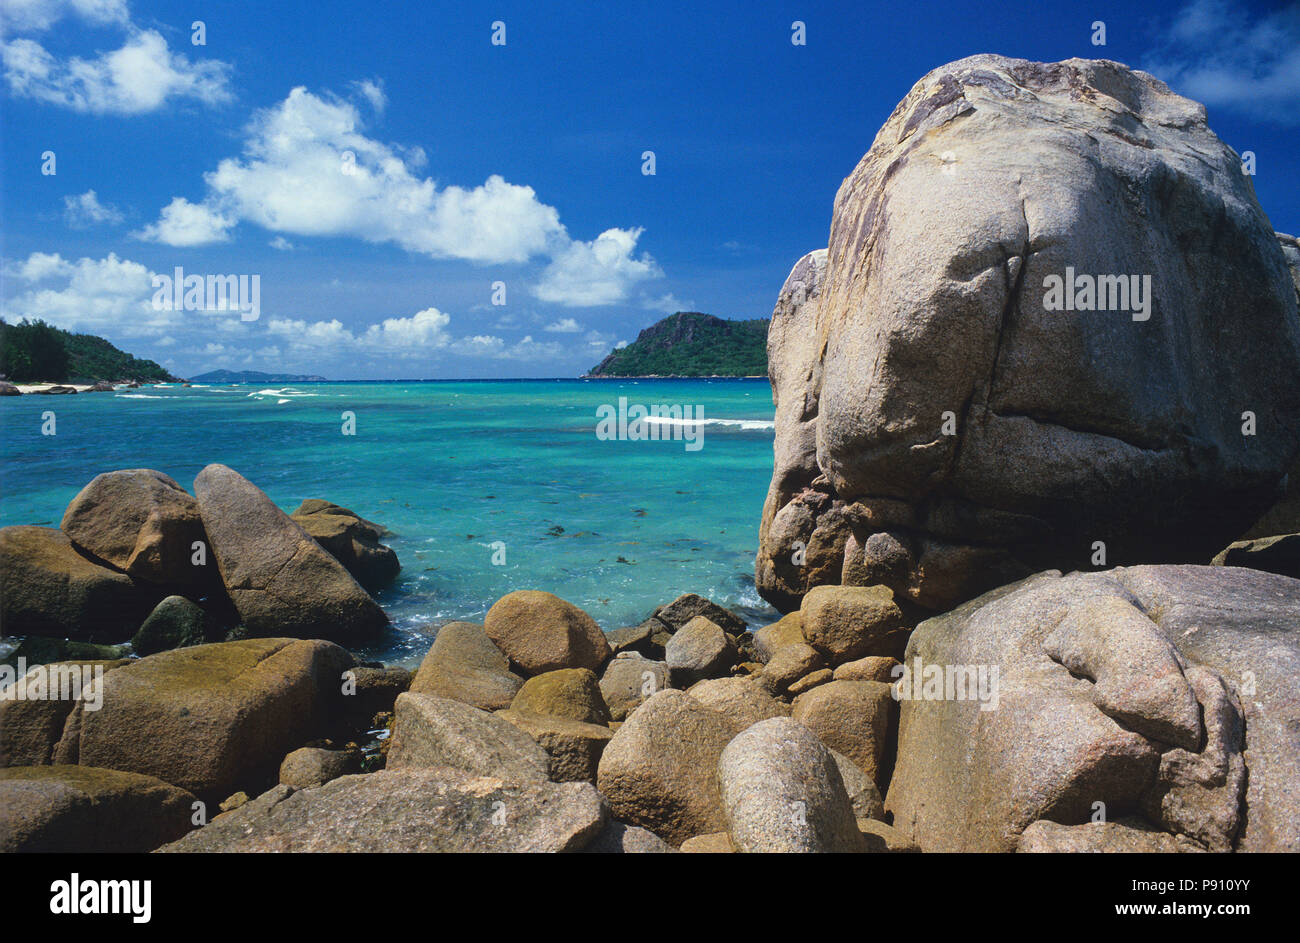 BEACH WITH LARGE ROCK AND ISLAND VIEW, SEYCHELLES, ISLAND, EAST AFRICA. JUNE 2009. The beautiful islands of the Seychelles in the Indian Ocean offer p Stock Photo